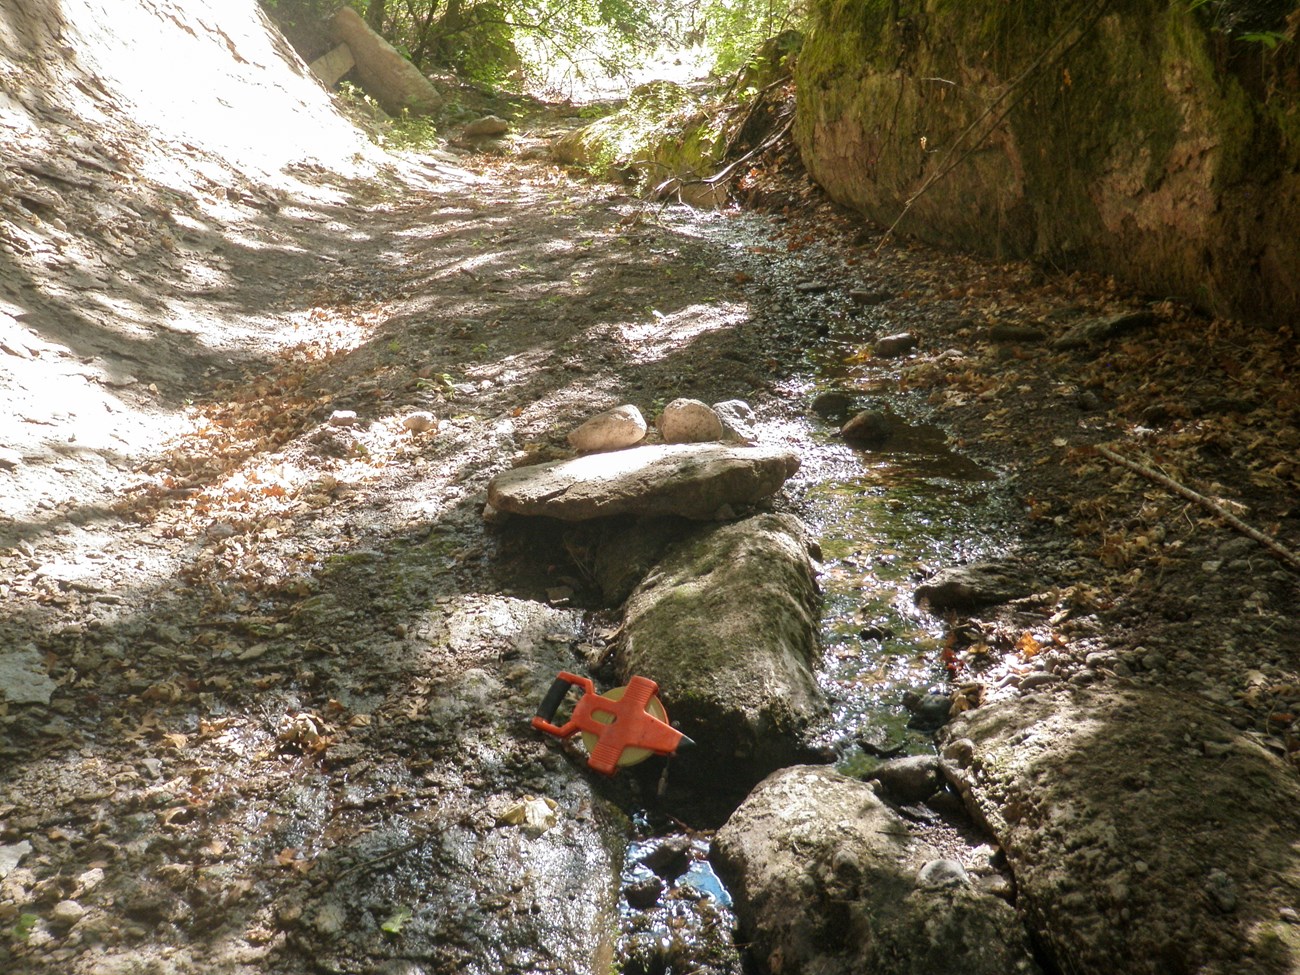 A small pool and stream in a rocky channel.